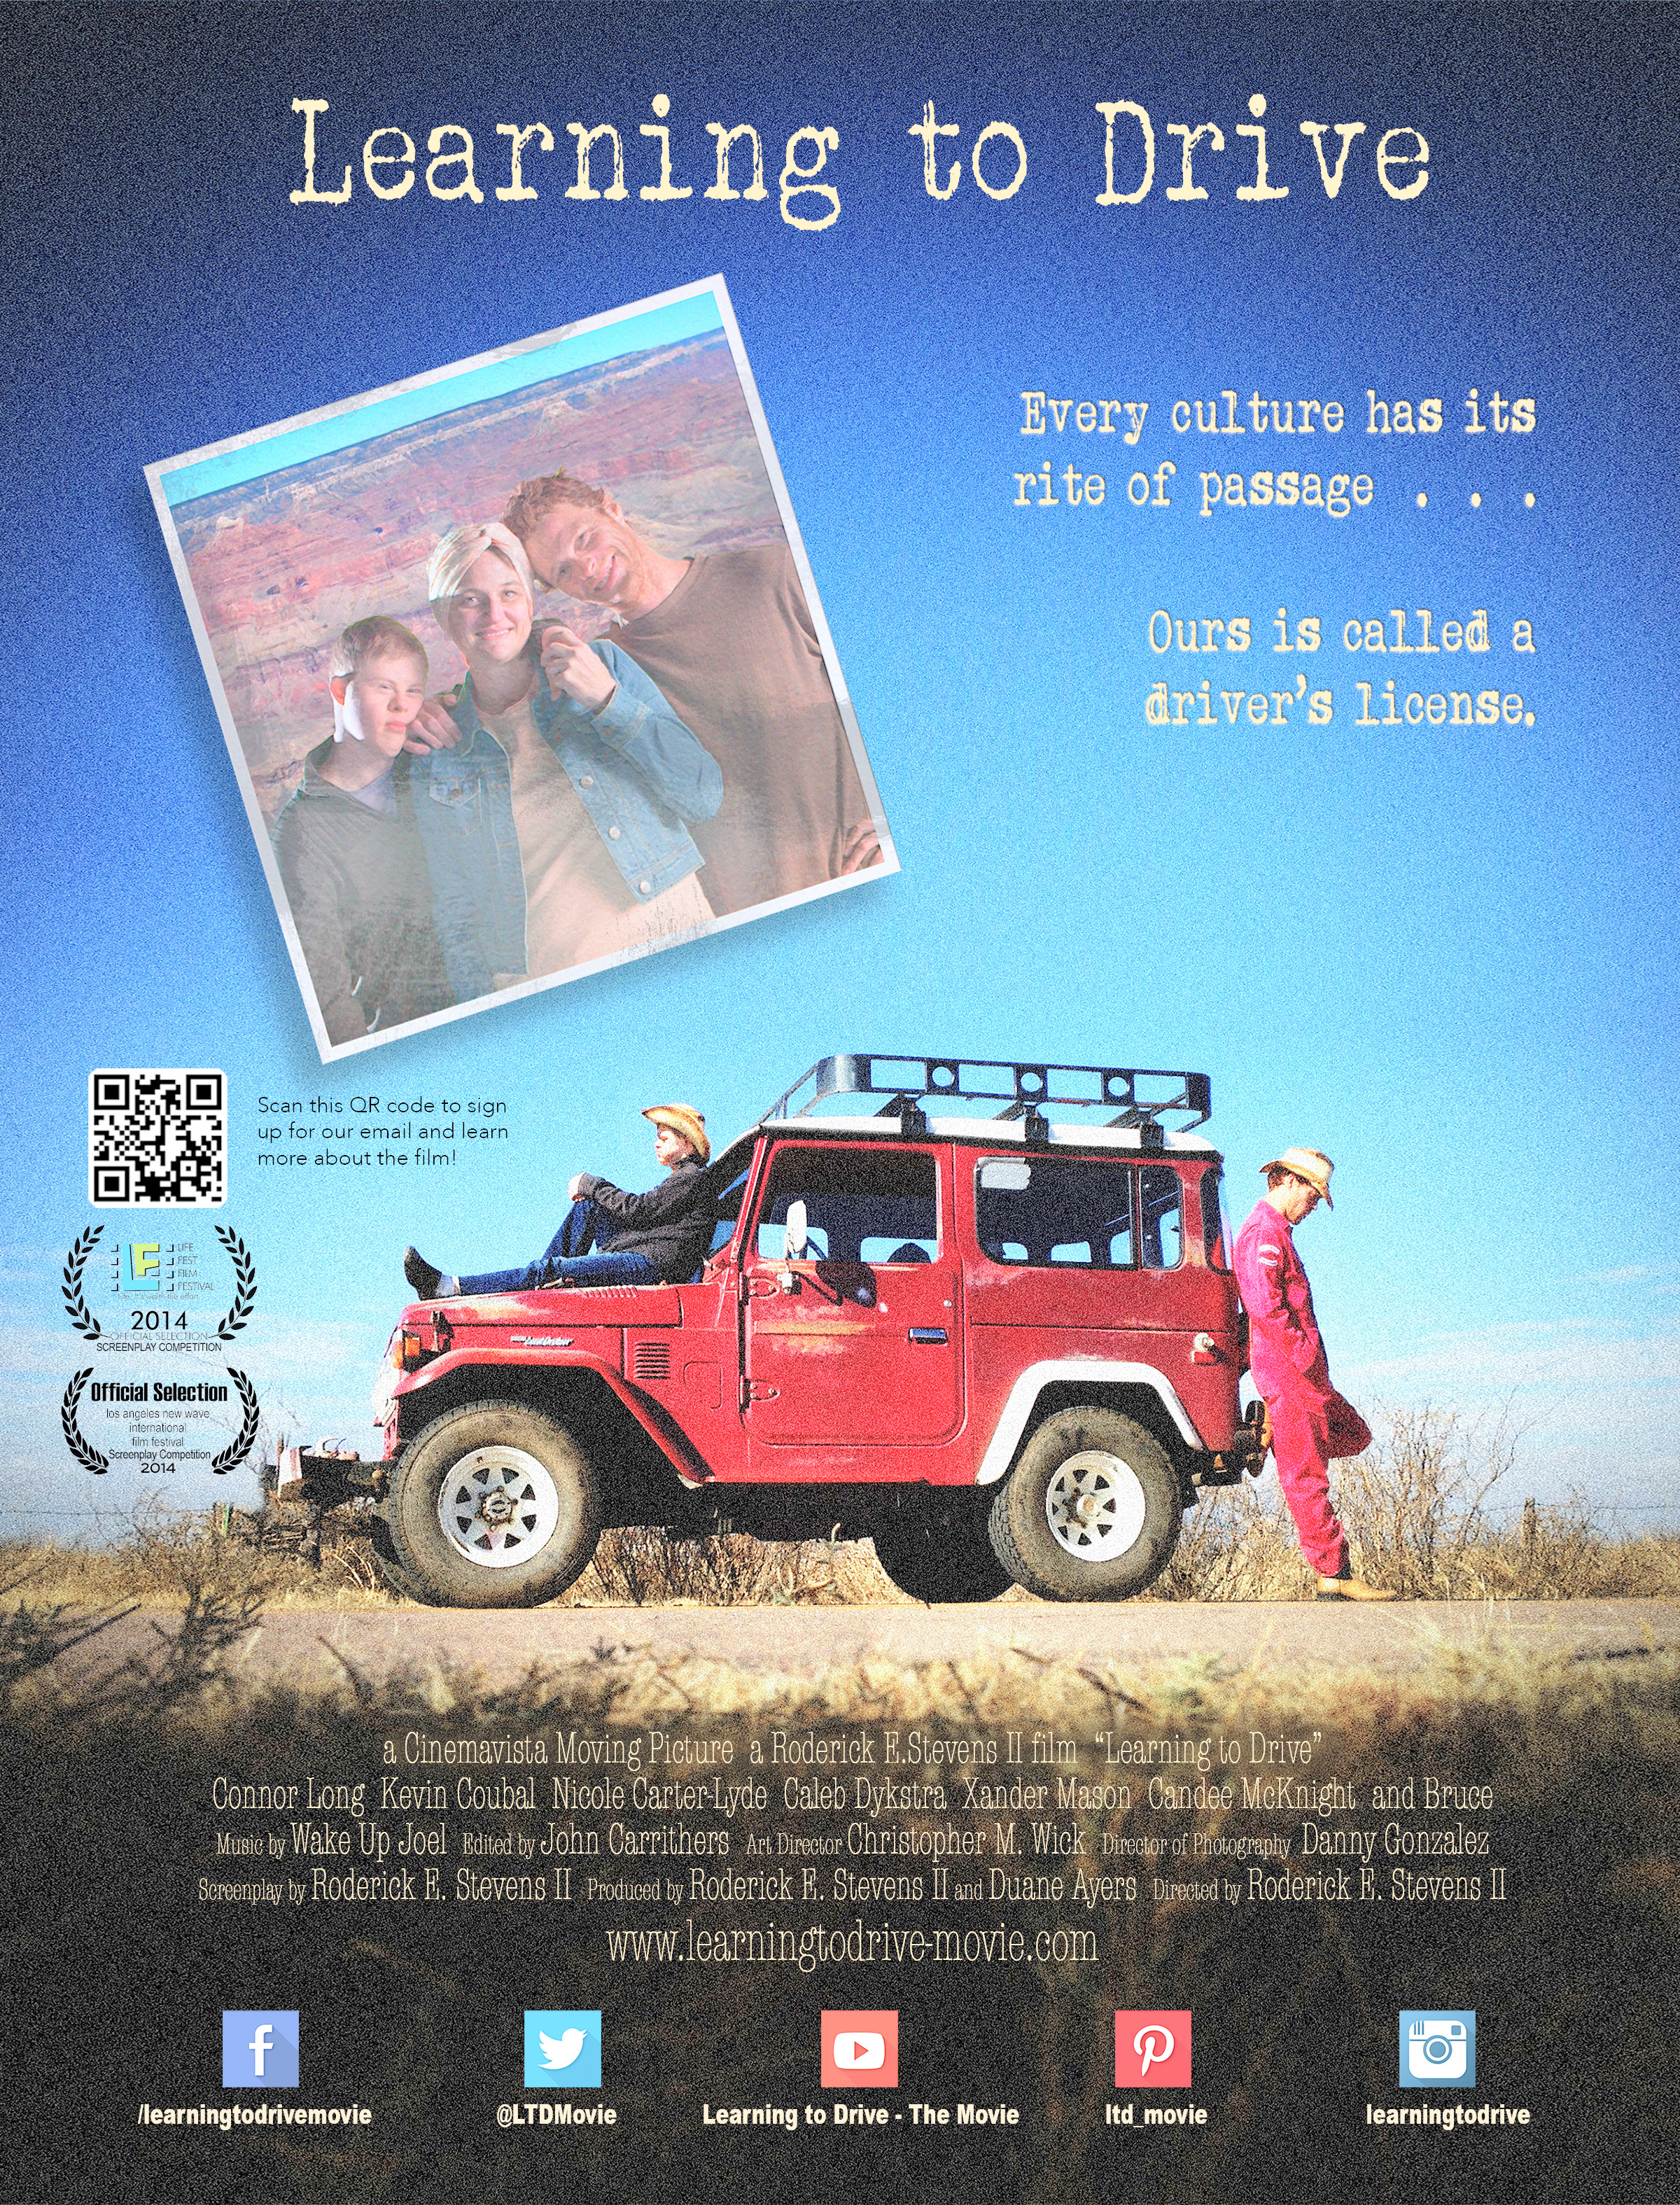 poster for the Learning to Drive short-film (2016) by Roderick E. Stevens